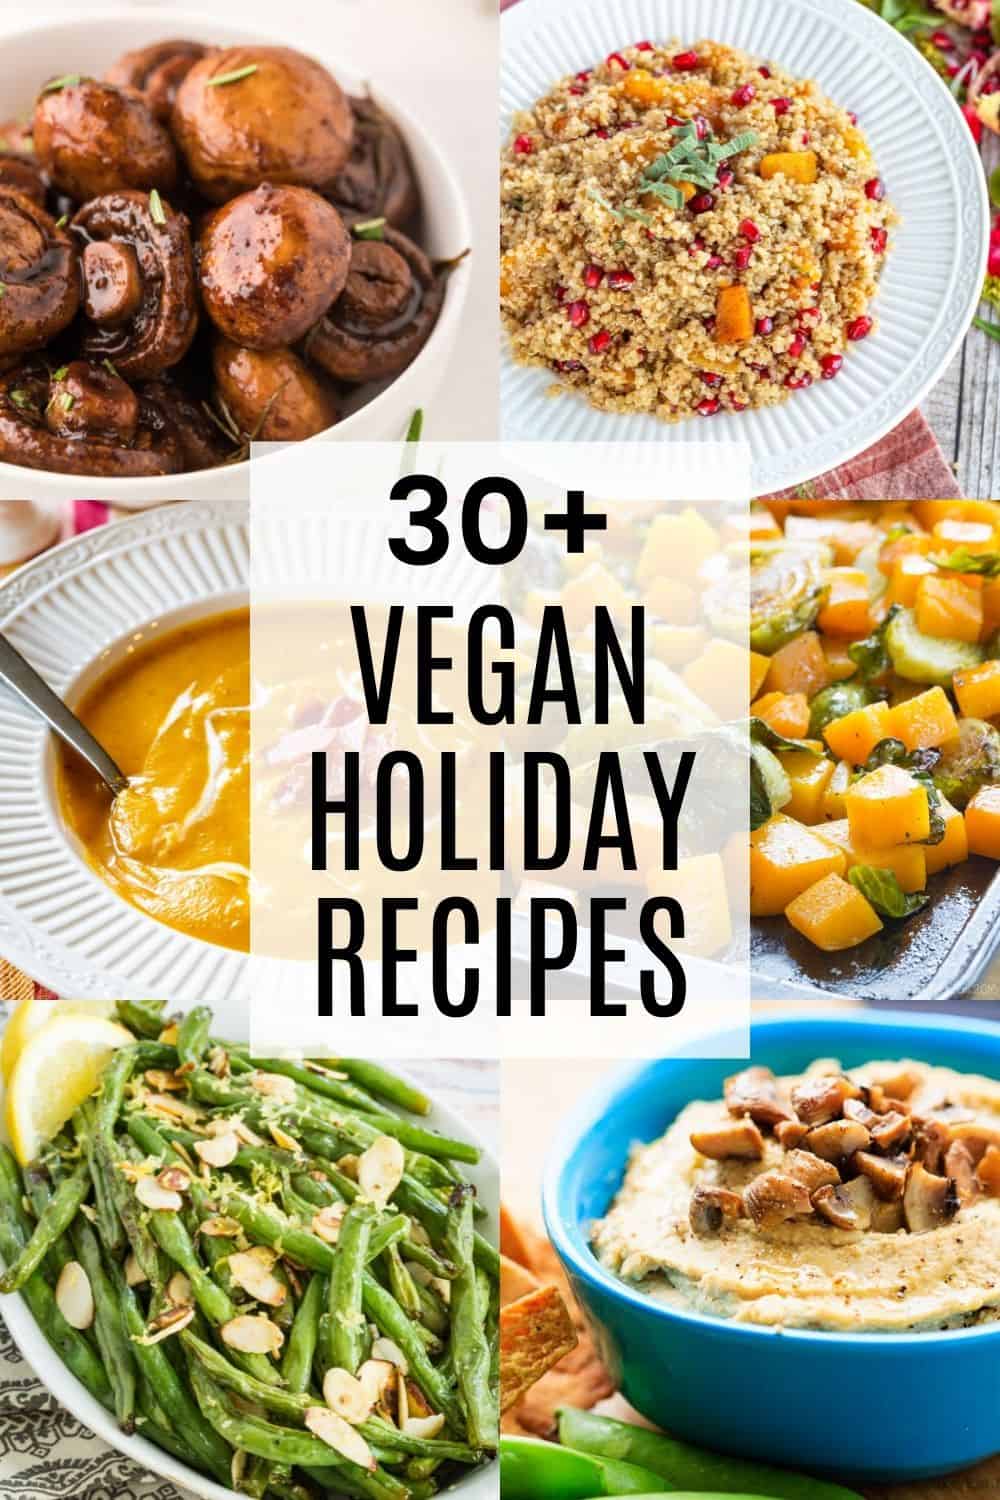 Photo collage and title card for 30 Vegan Holiday Recipes, featuring photos of roasted mushrooms, quinoa salad, soup, roasted brussels and butternut squash, green beans, and mushroom hummus